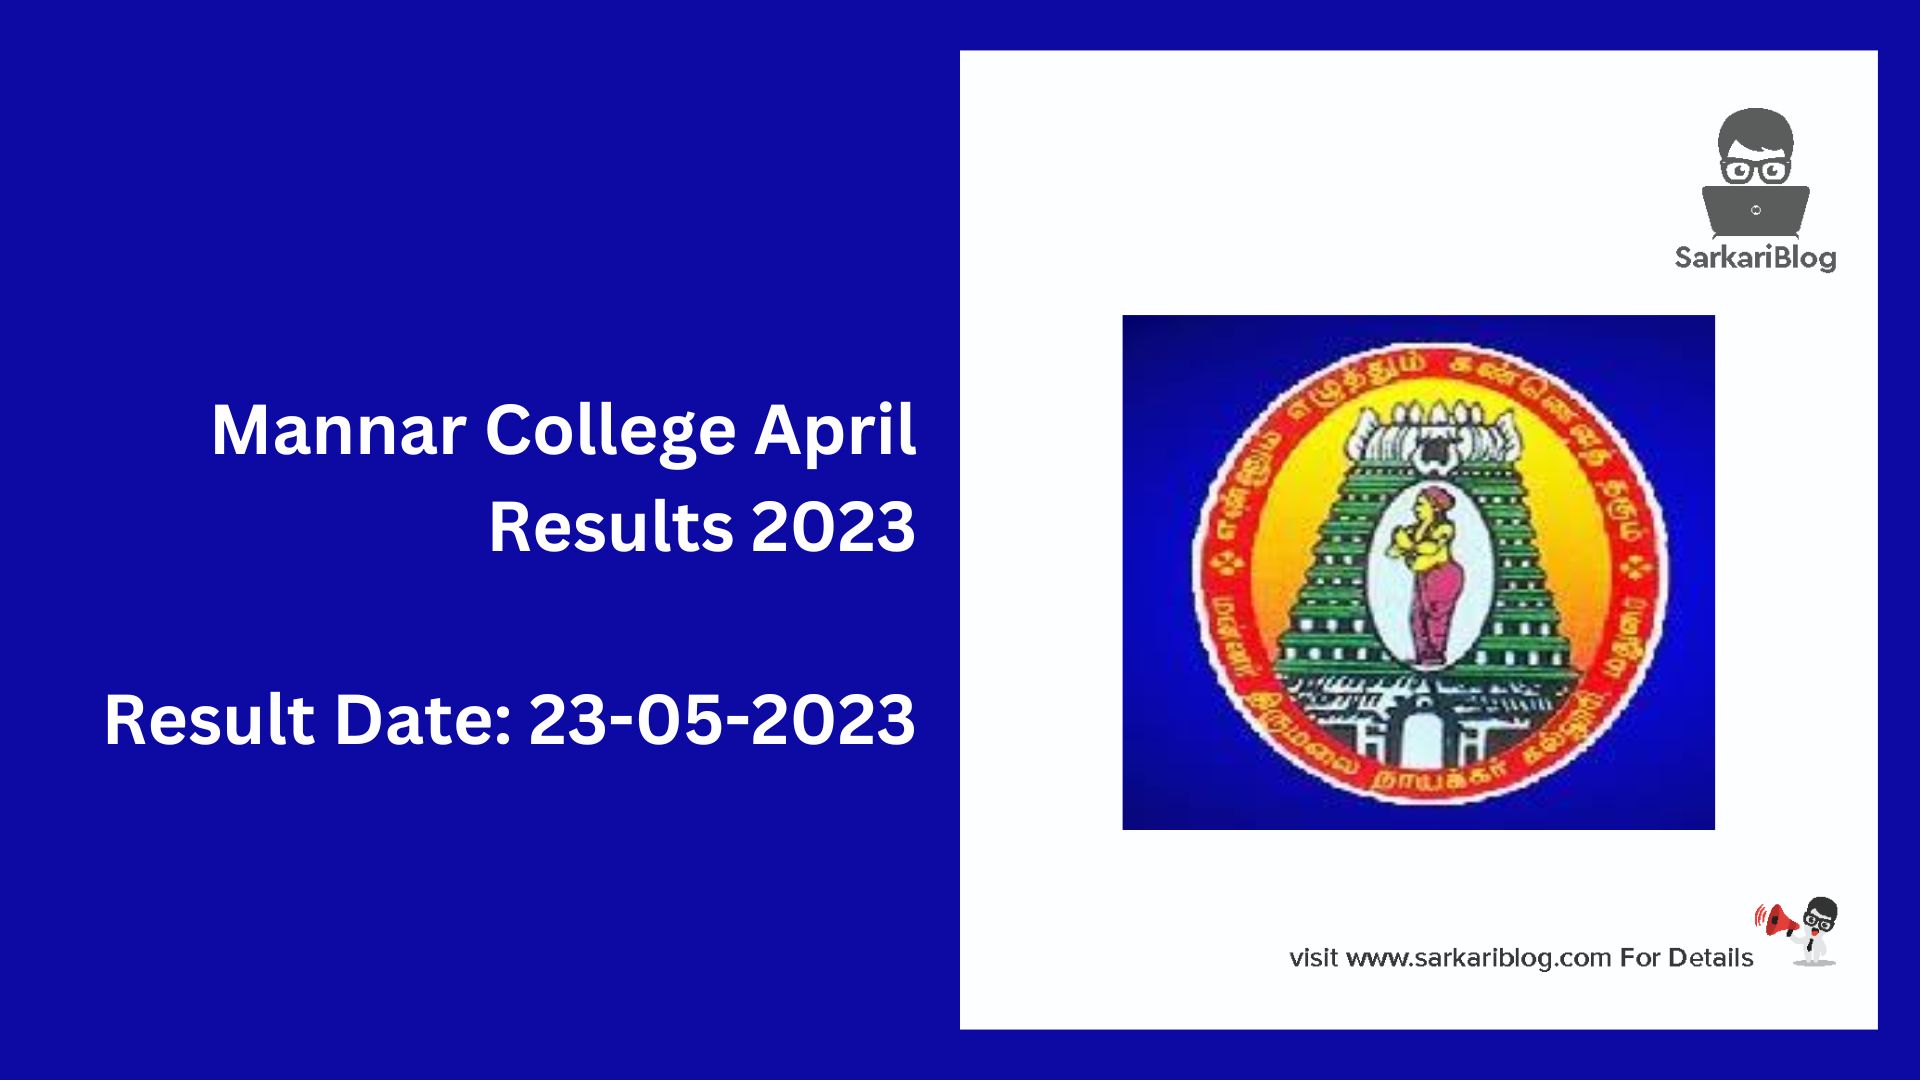 Mannar College April Results 2023